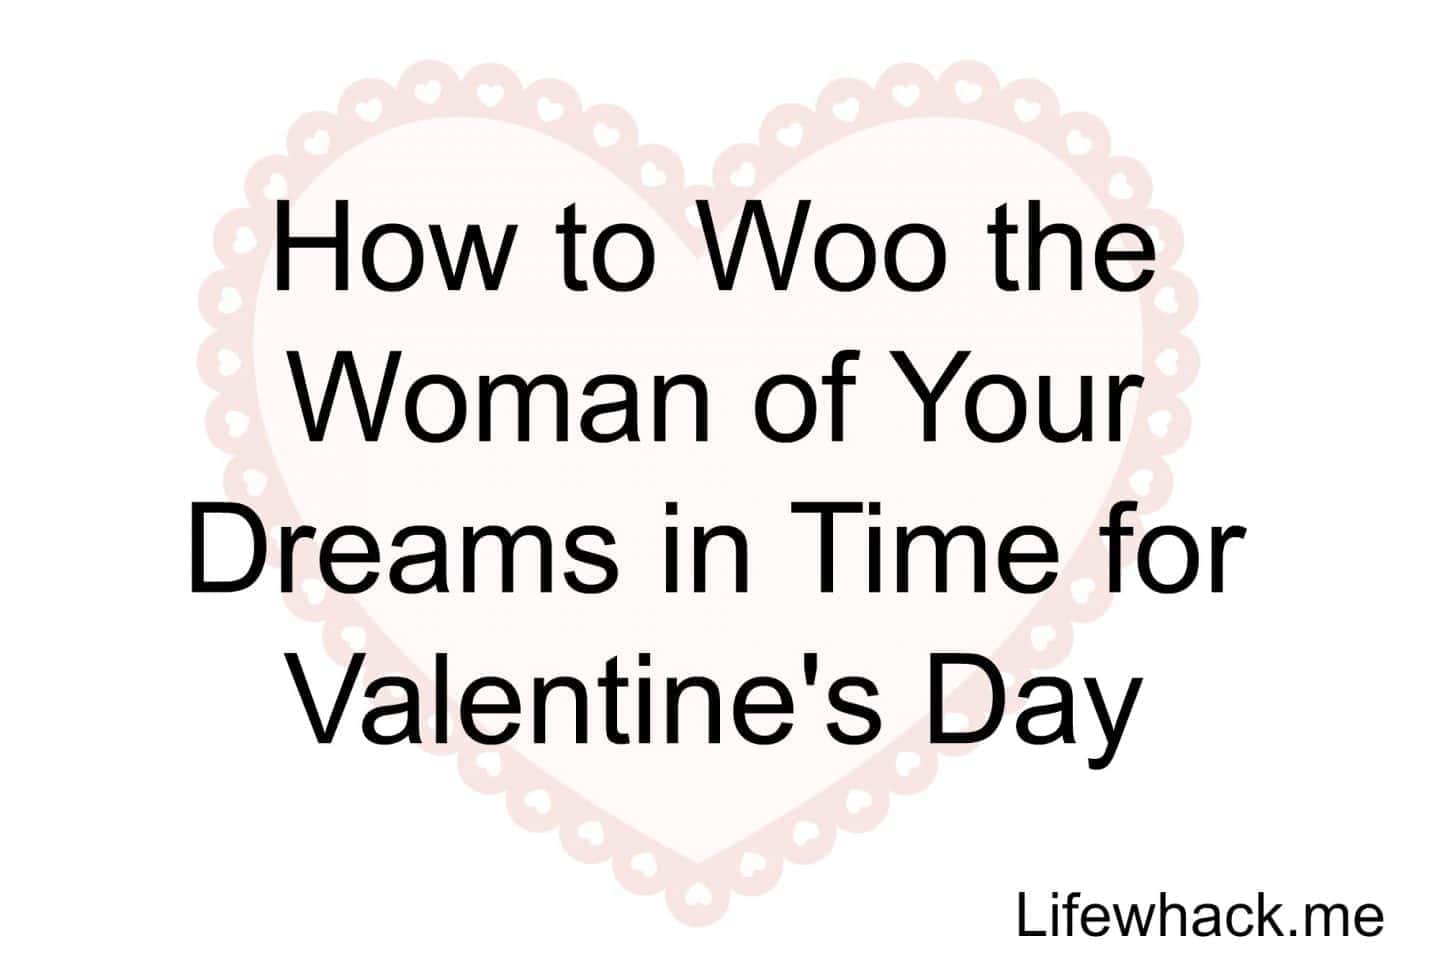 How to Woo the Woman of Your Dreams in Time for Valentine’s Day